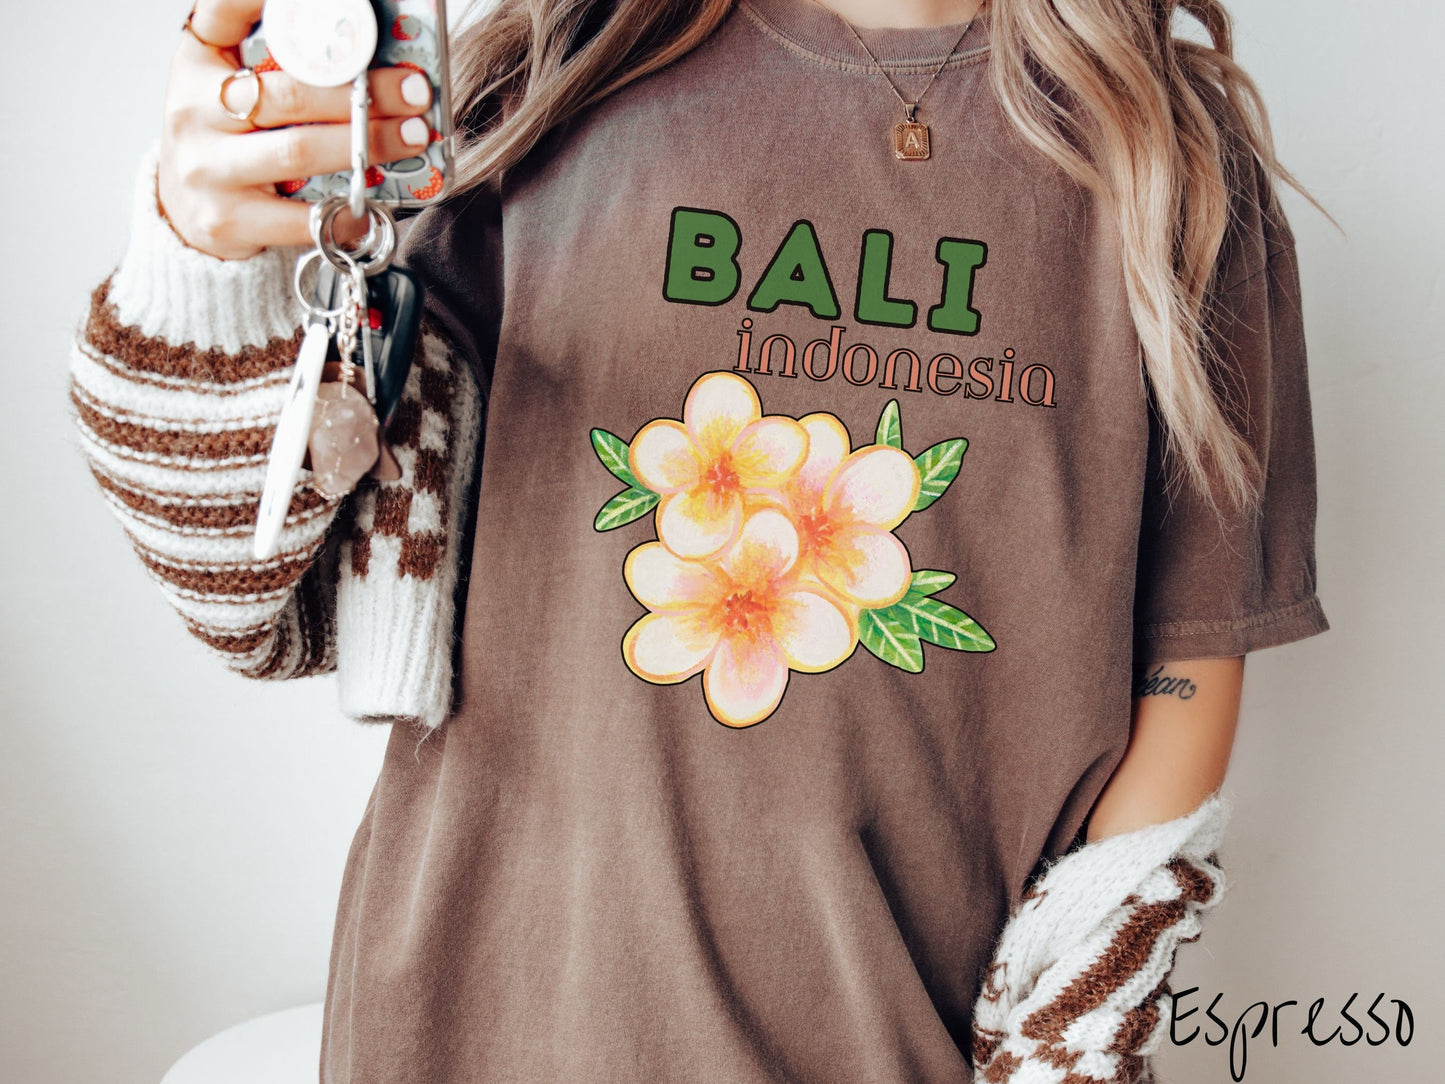 A woman wearing a vintage, espresso colored shirt with the text Bali Indonesia in green and yellow font, respectively, and a picture underneath of three beautiful yellow and orange flowers with green leaves.